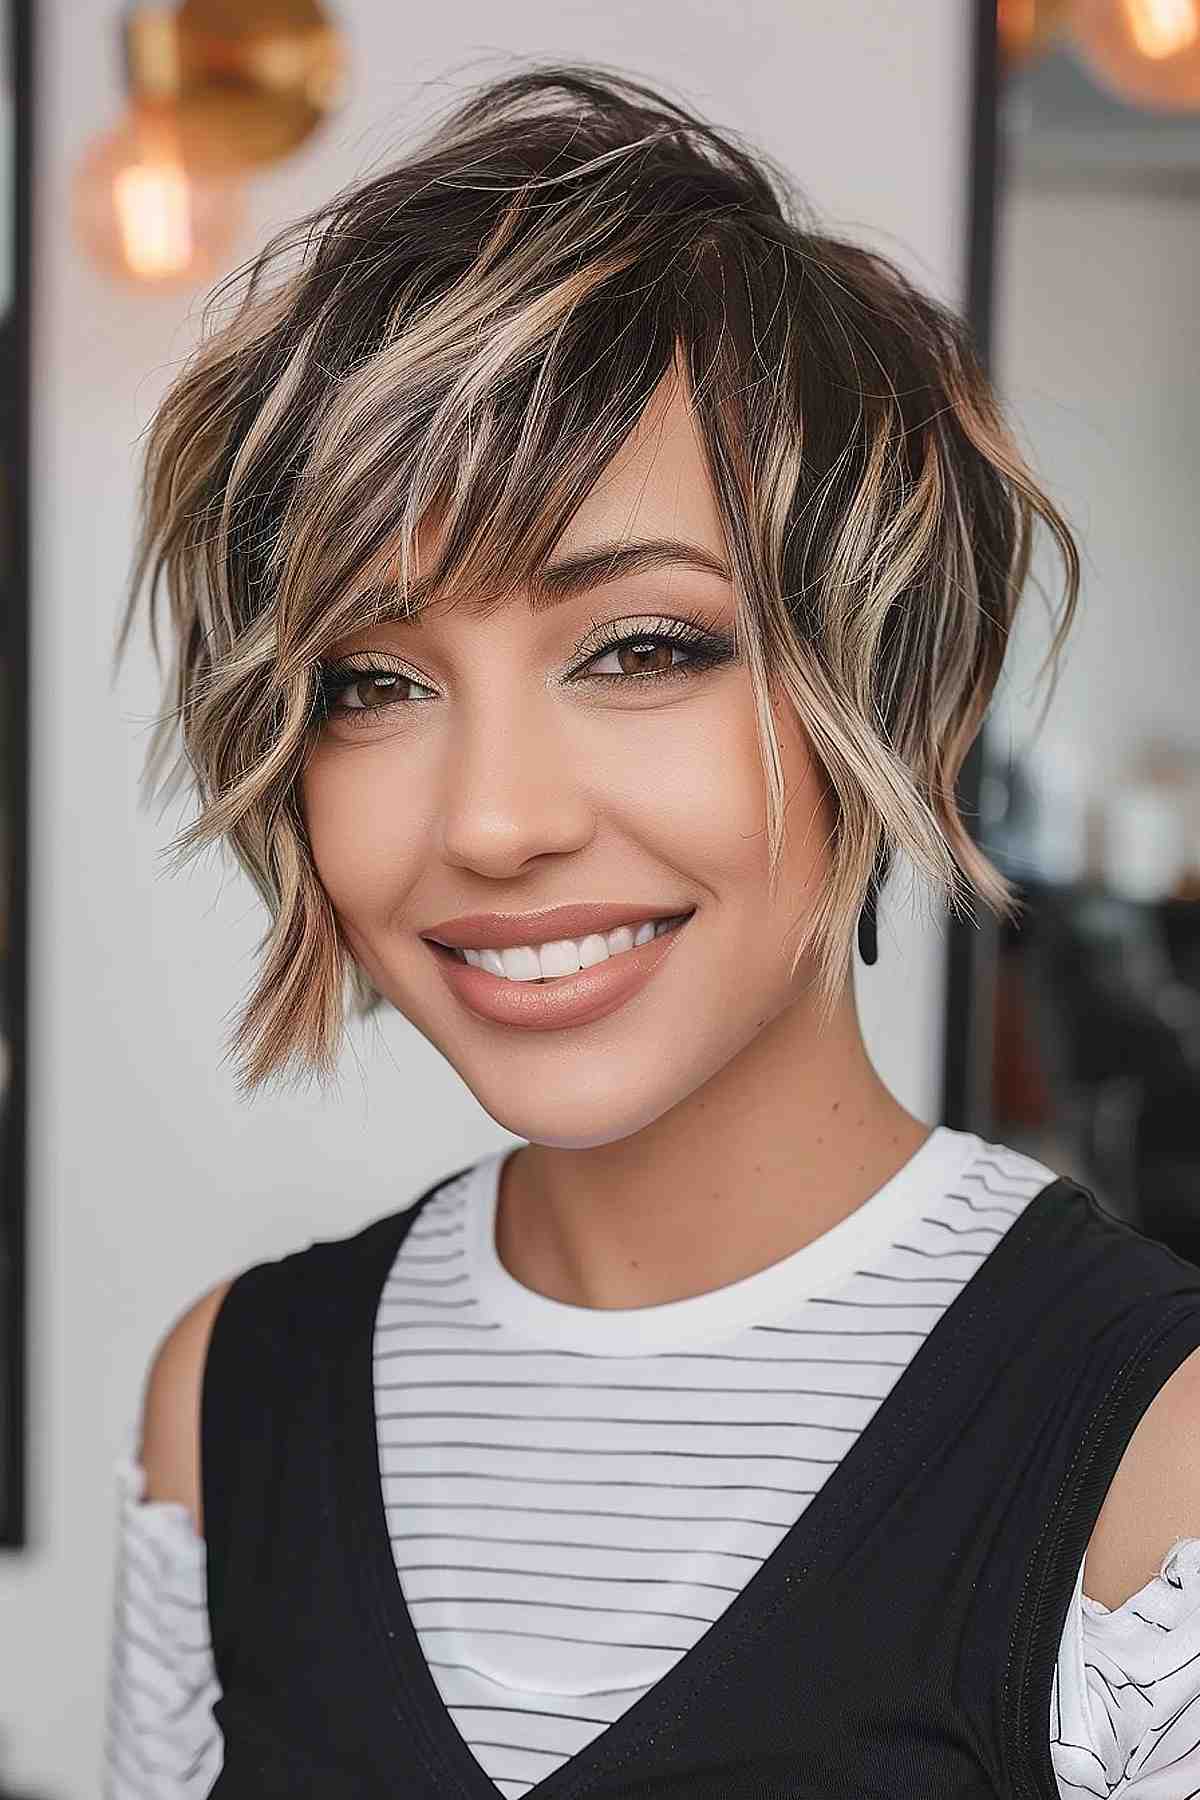 Elf cut with highlighted tips, featuring dark and light hues and an asymmetrical fringe.